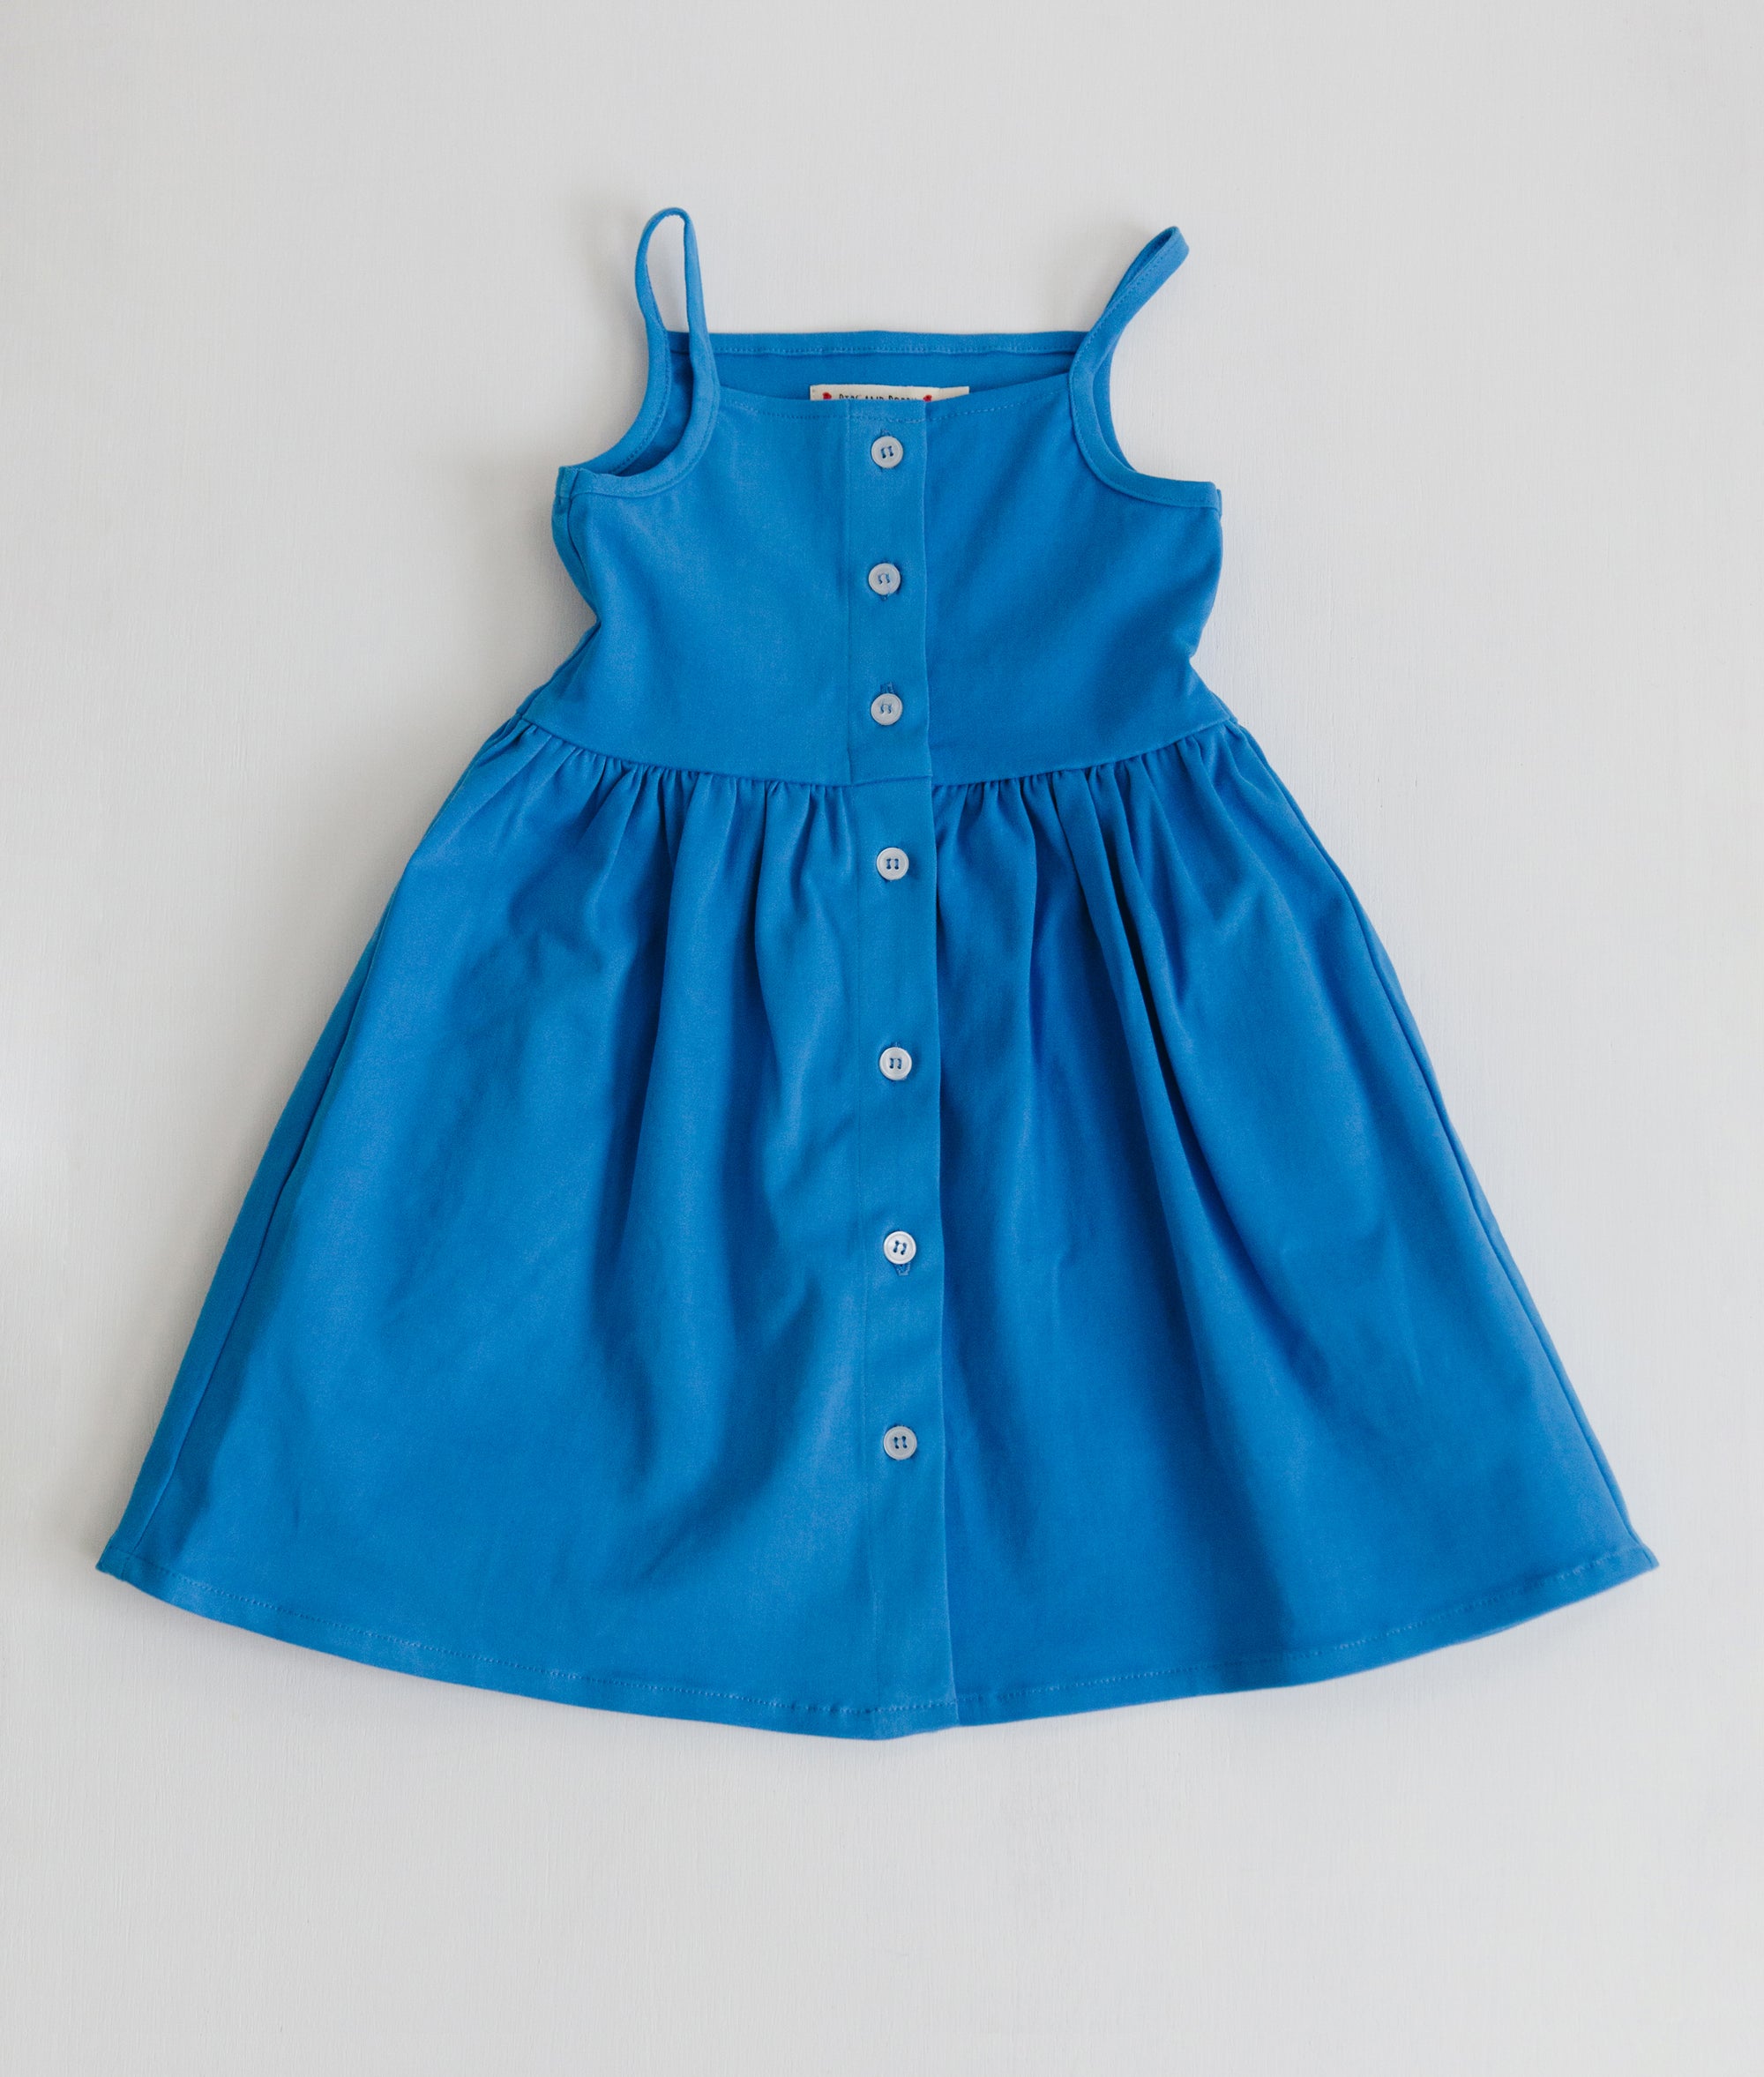 The Heather Dress in Blueberry